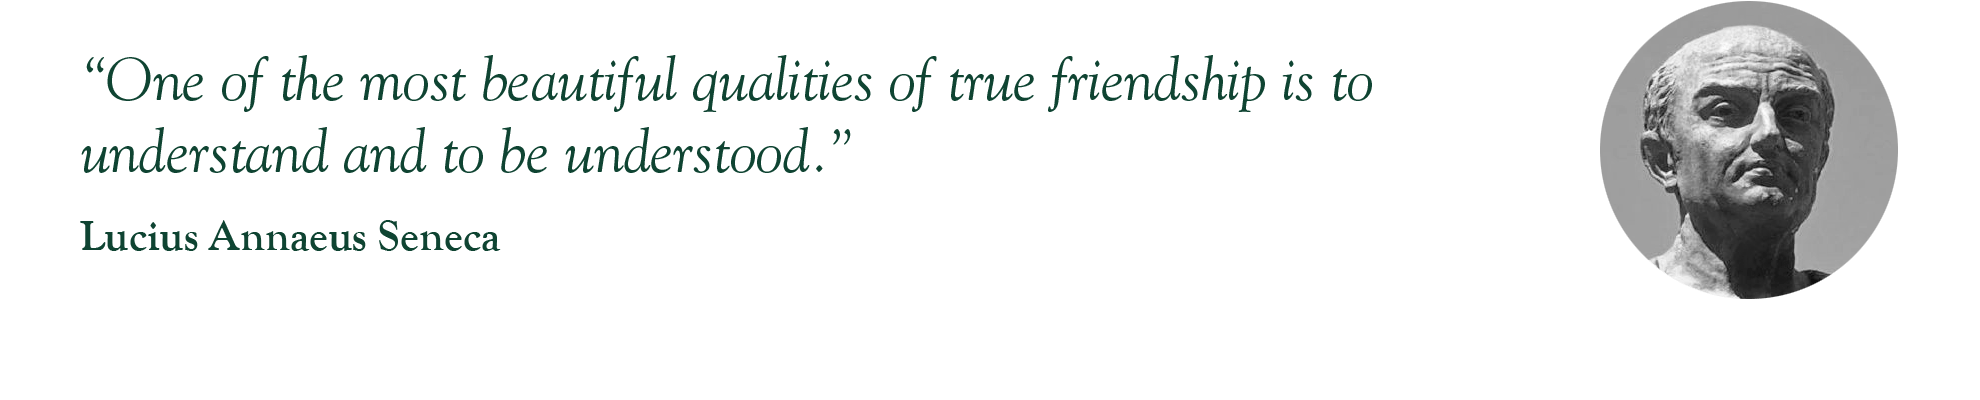 “One of the most beautiful qualities of true friendship is to understand and to be understood.” – Lucius Annaeus Seneca